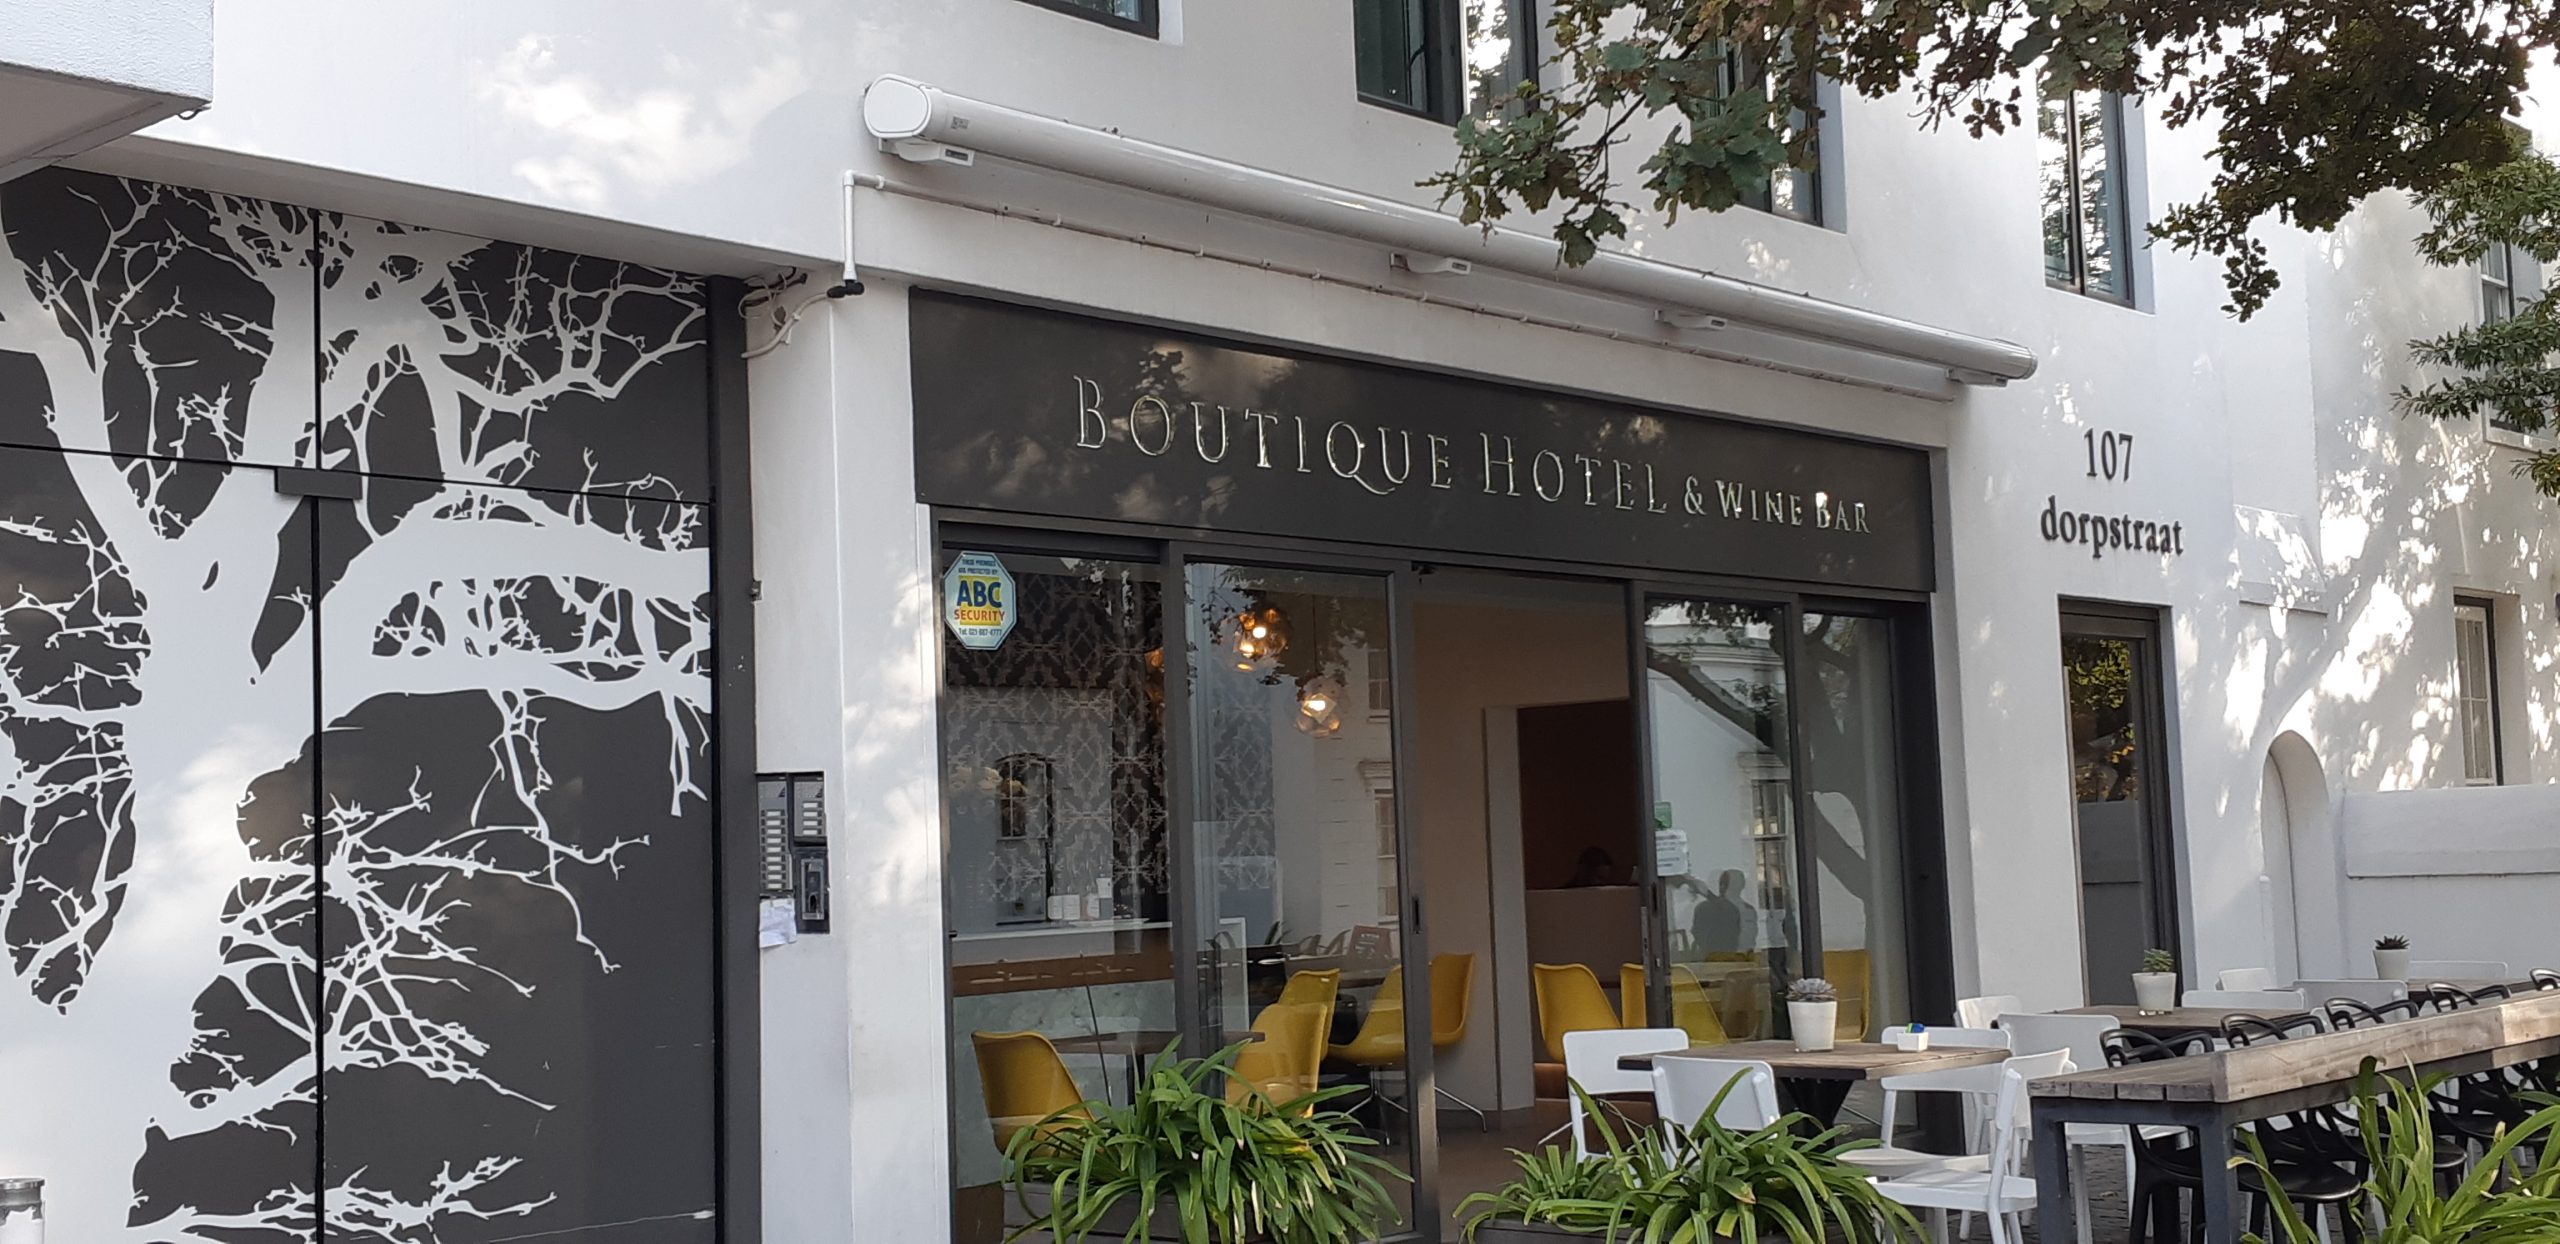 Read more about the article 107 Dorpstraat Boutique Hotel – Laidback Luxury In Stellenbosch